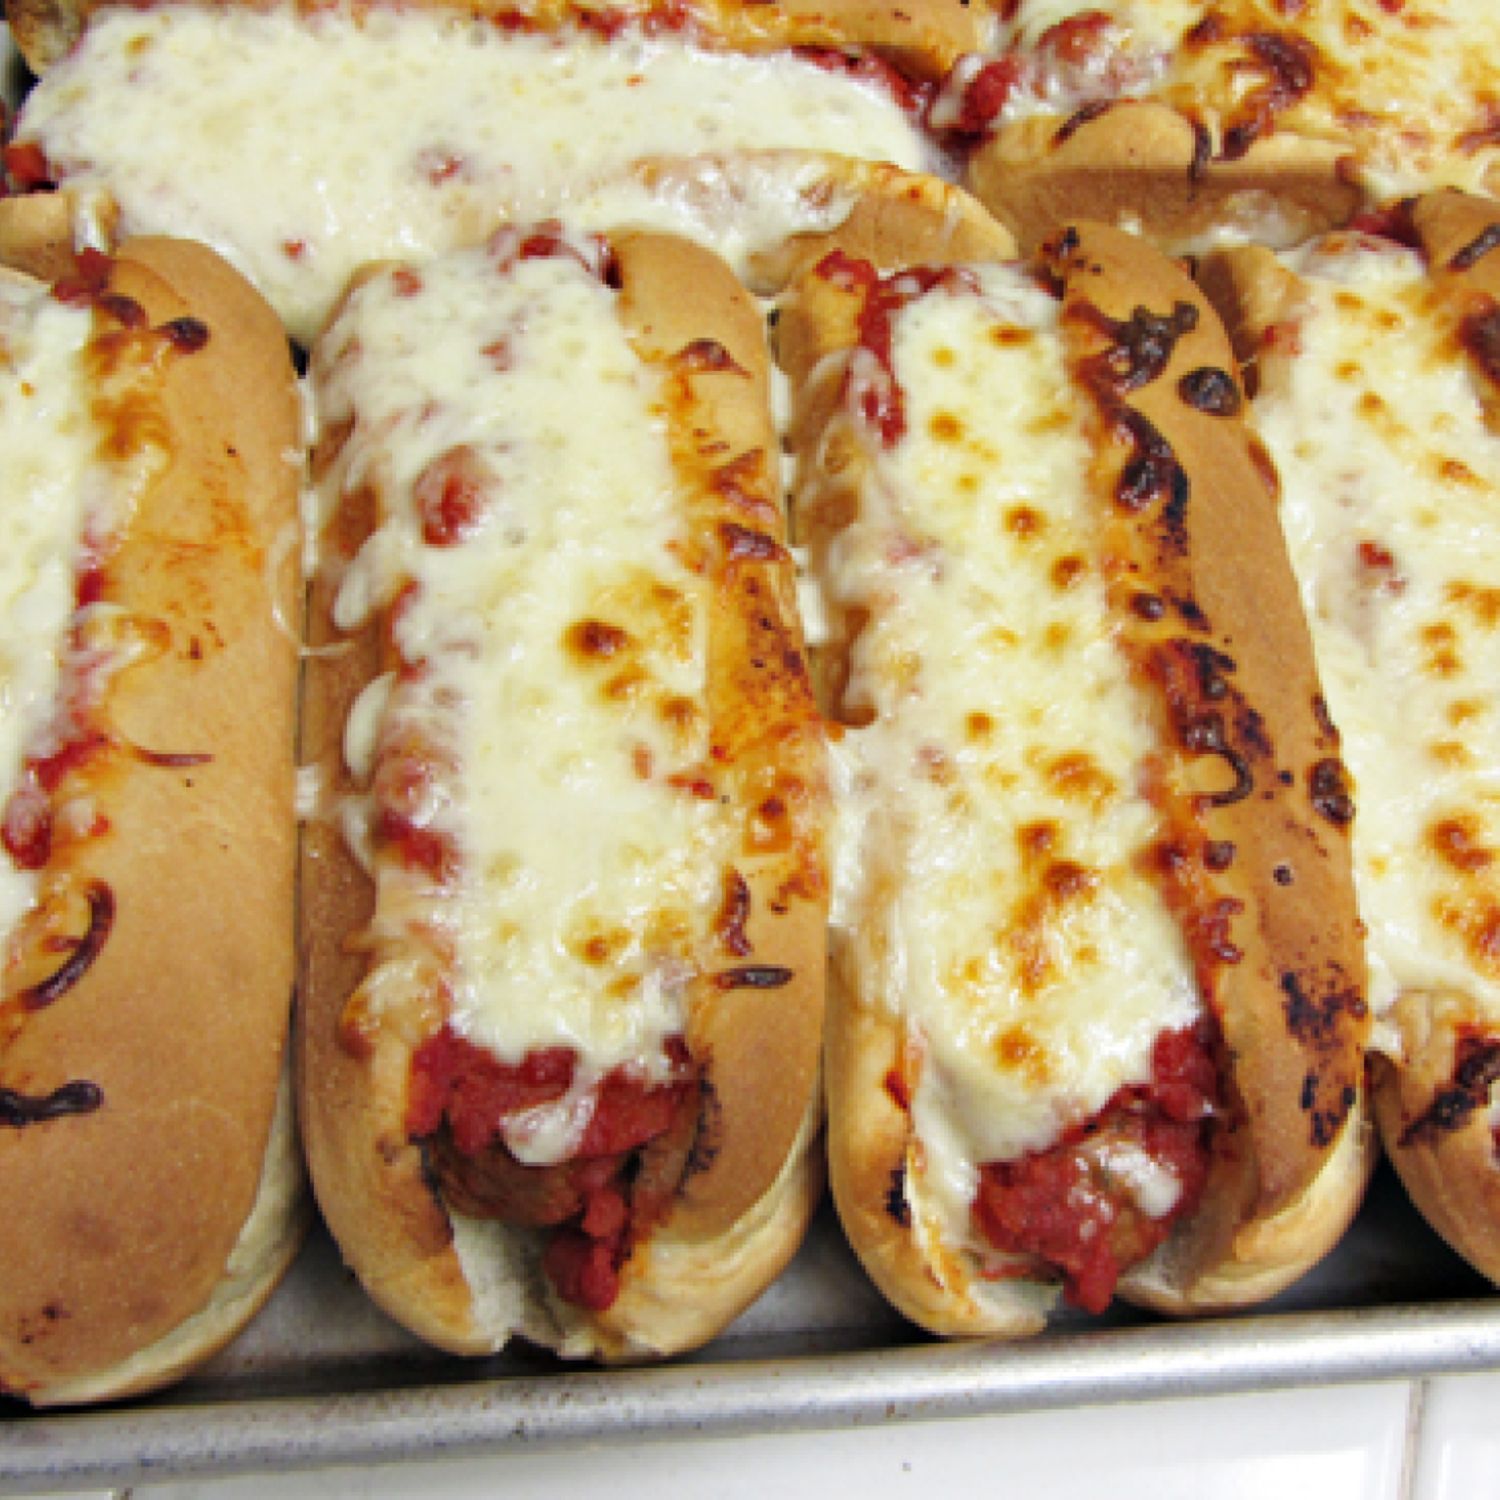 Oven Baked Meatball Sandwiches. Tried 9-18-13 very good with my homemade meatballs! One of our favs!.. LH